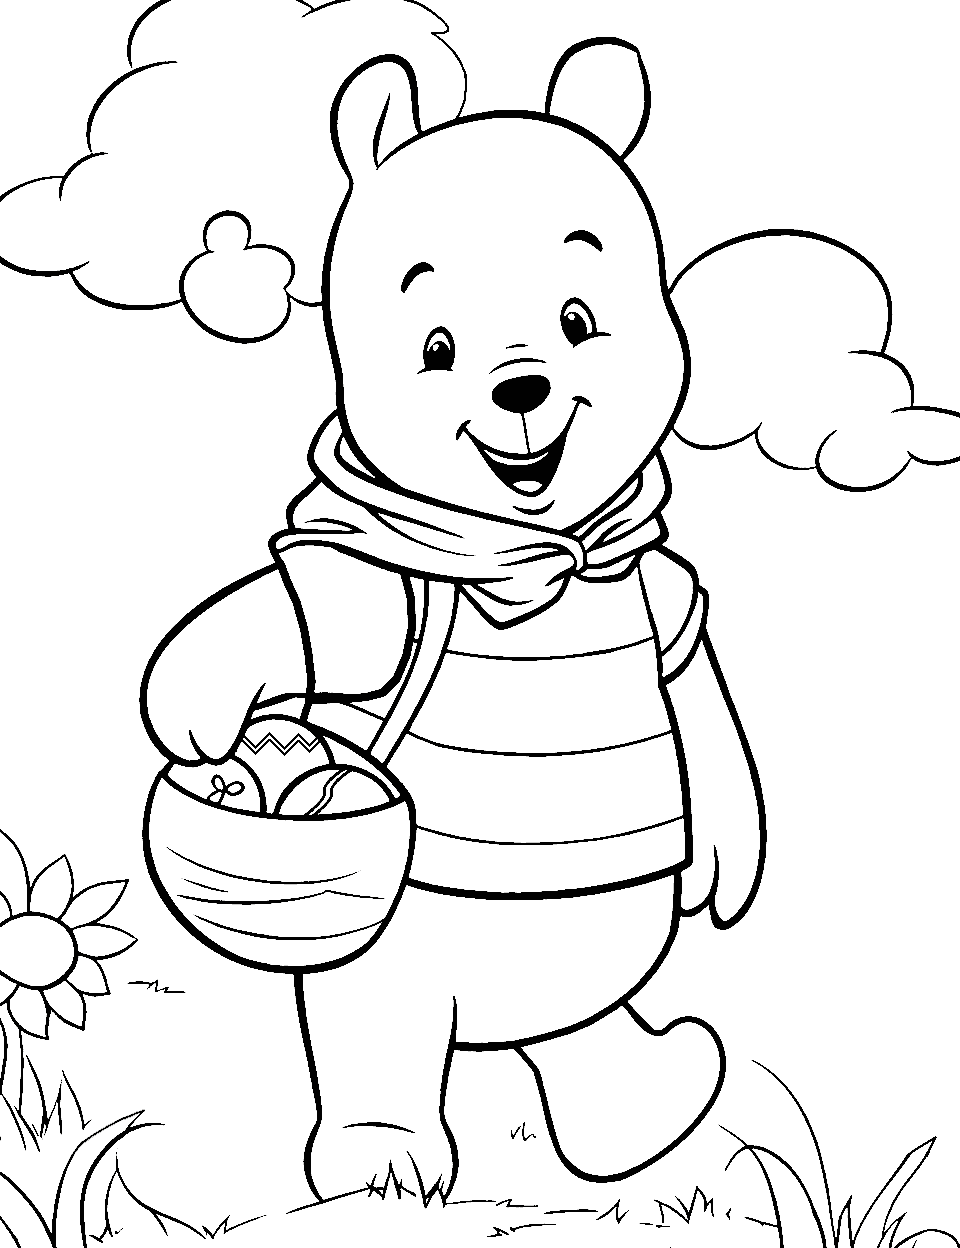 Easter Egg Hunt Coloring Page - Pooh Bear holding a basket and finding a beautifully decorated Easter egg hidden in the grass.